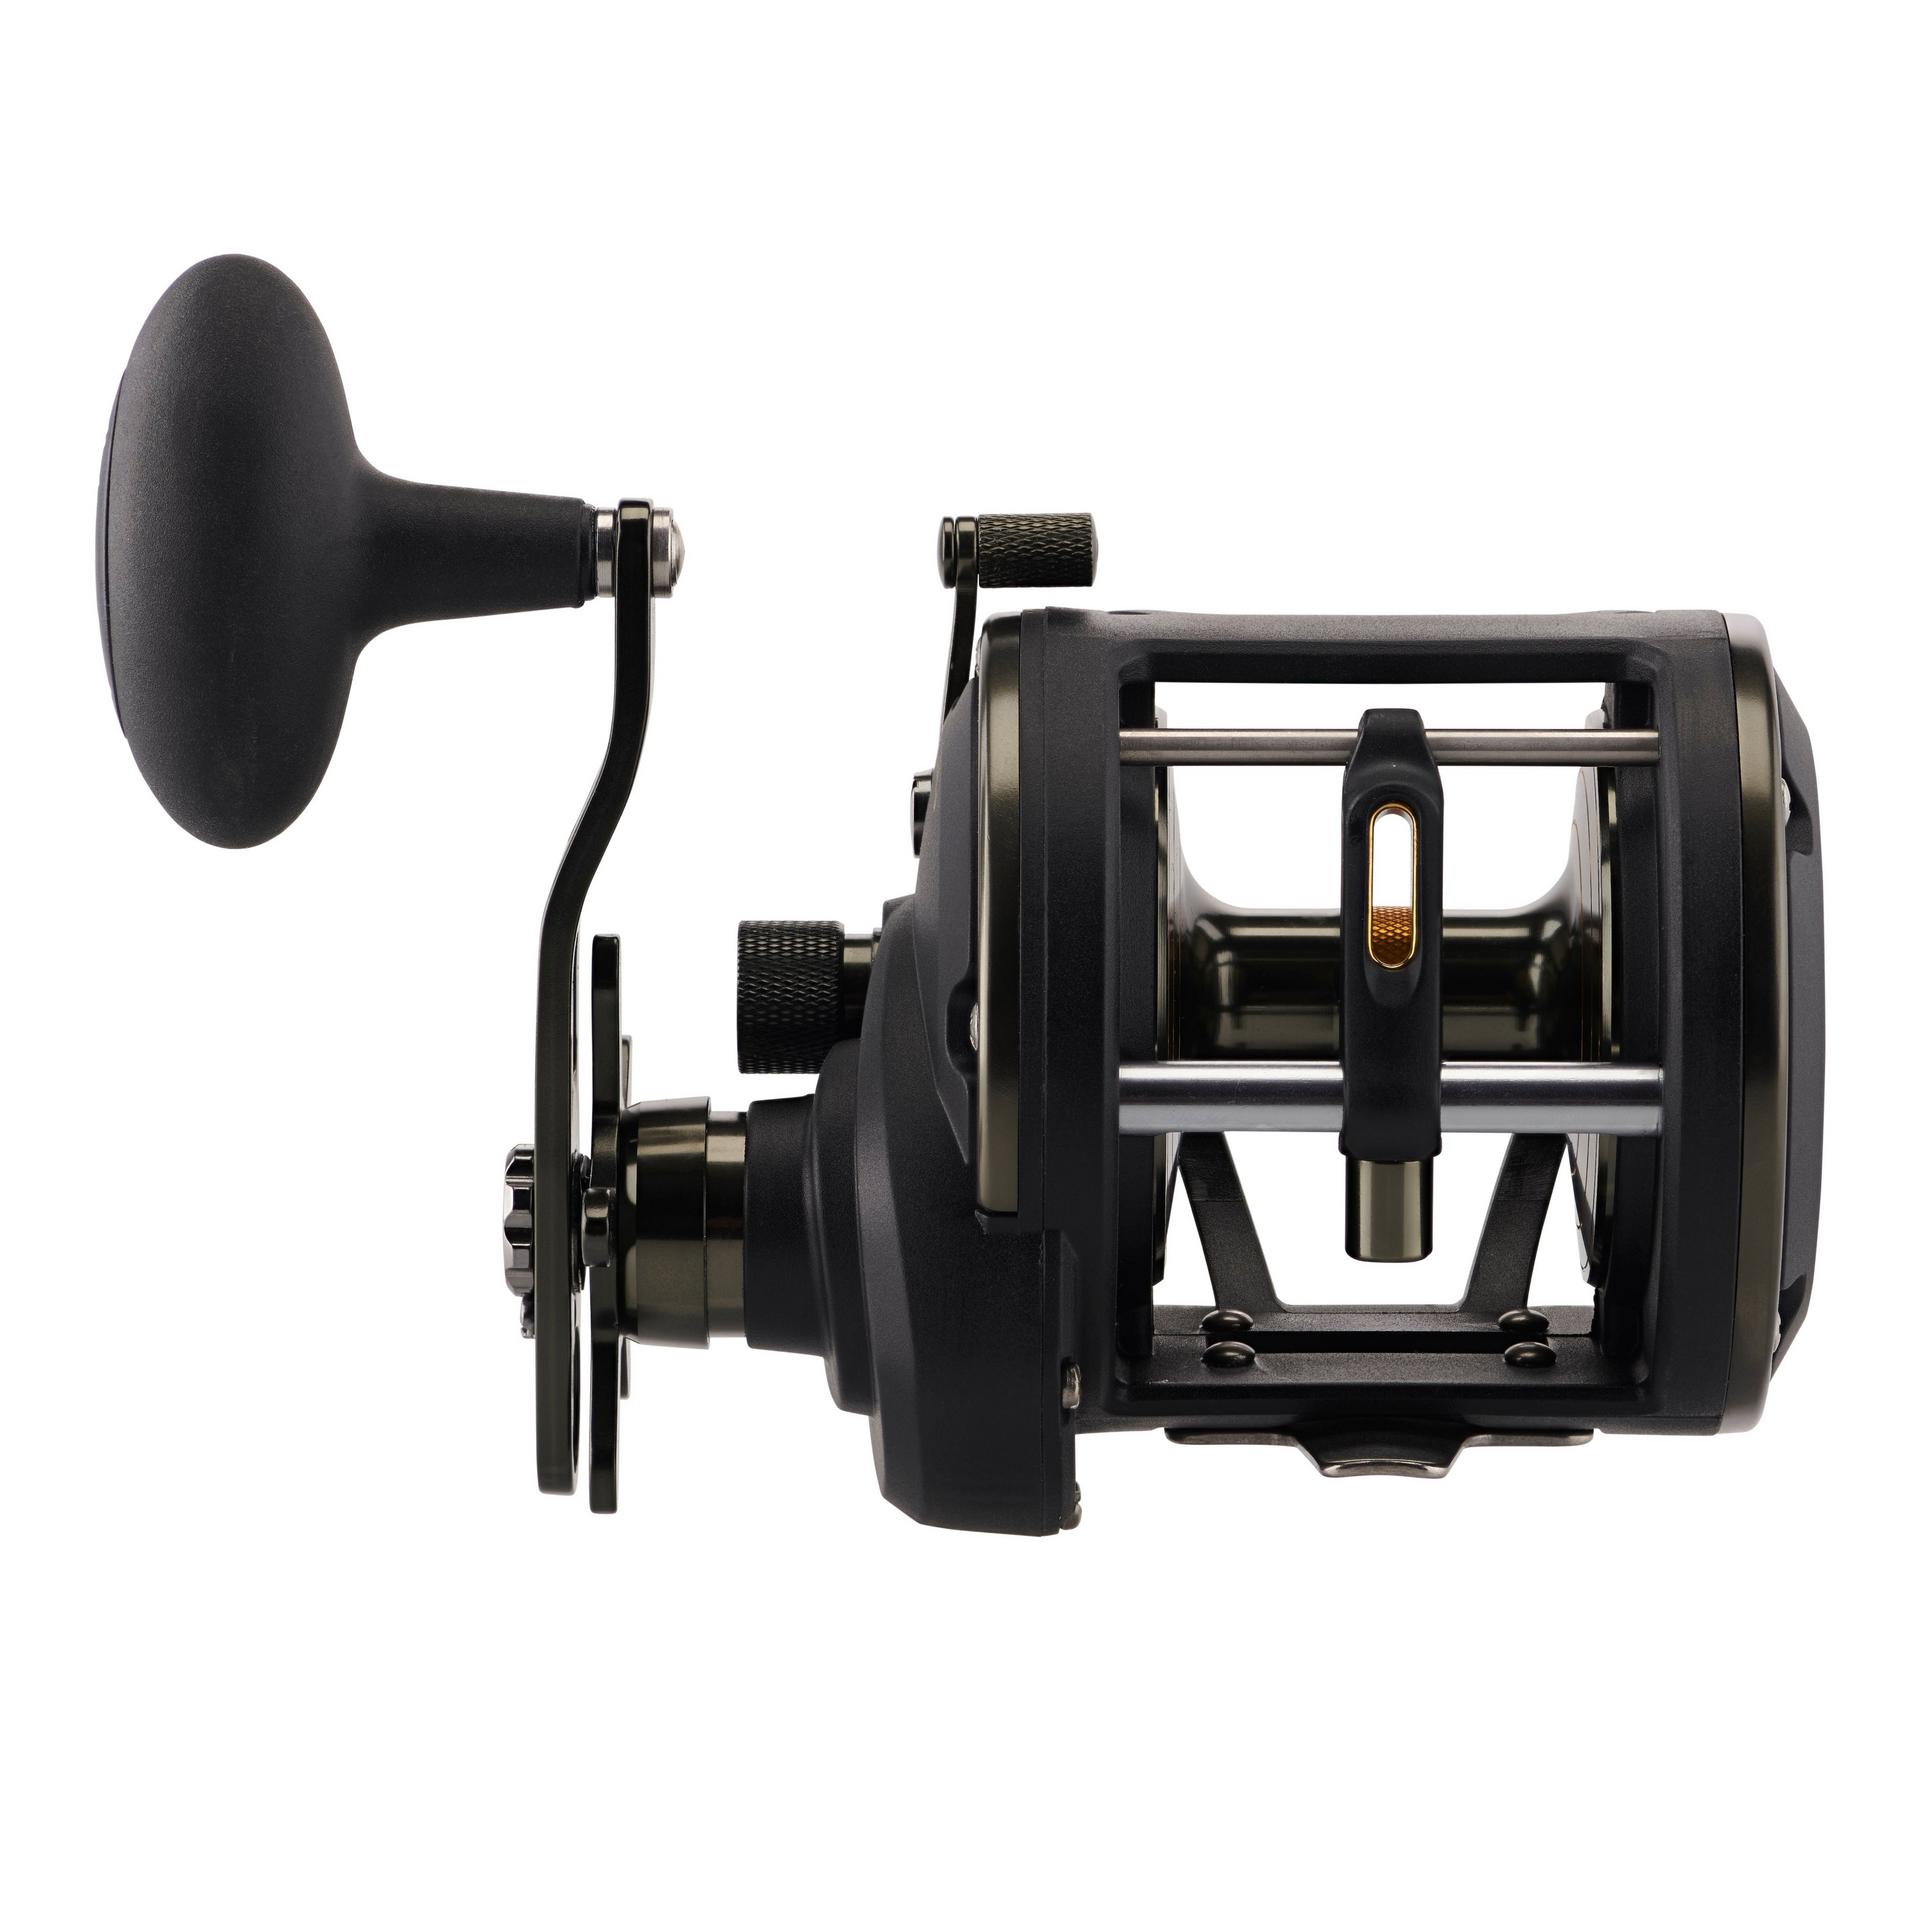 Squall® II Level Wind Conventional Reel